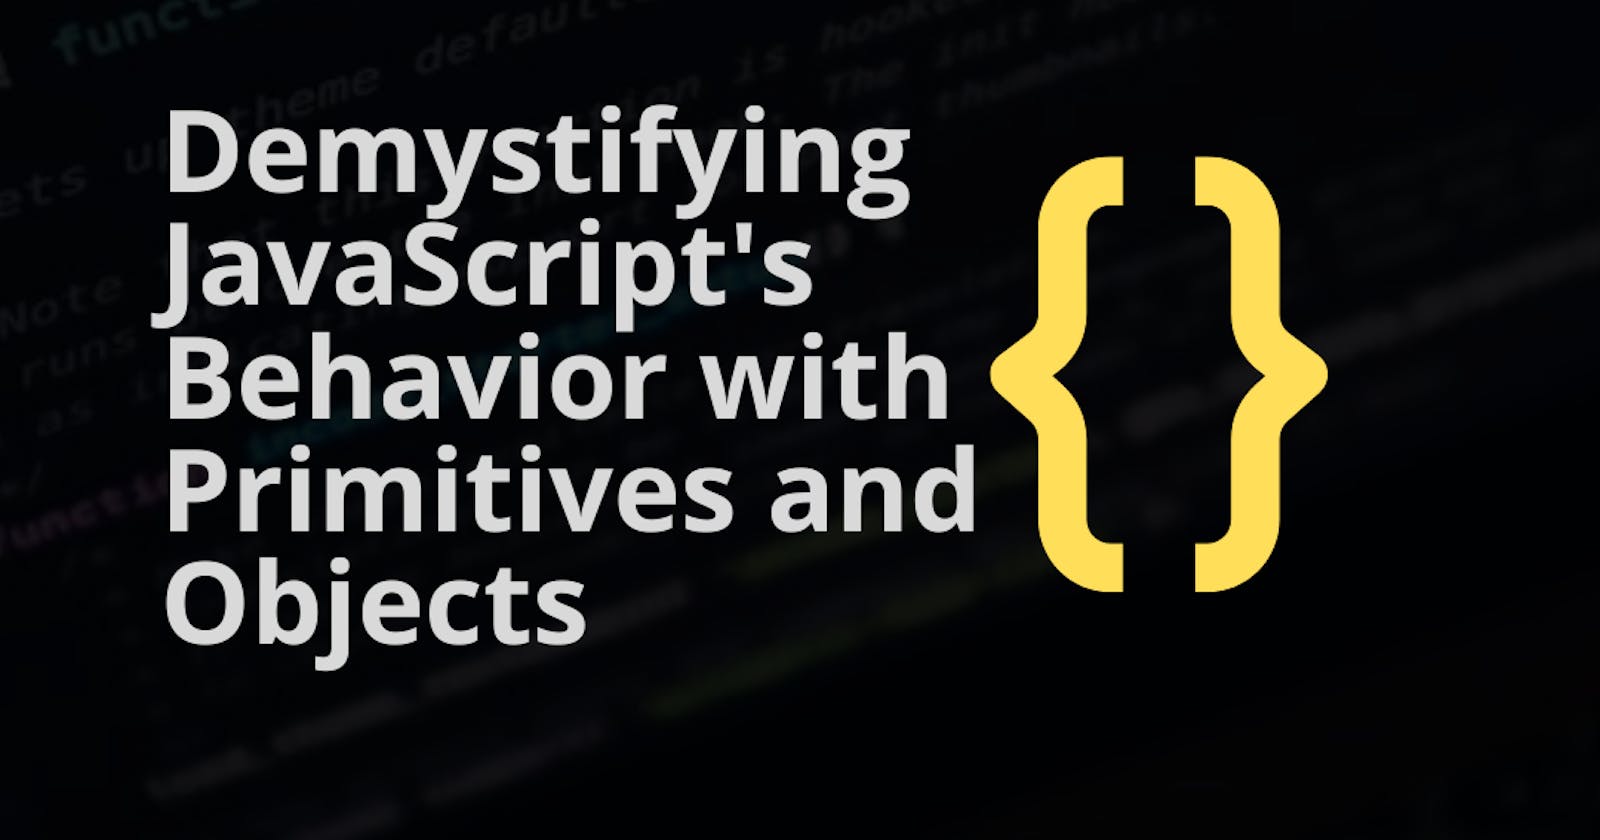 Demystifying JavaScript's Behavior with Primitives and Objects